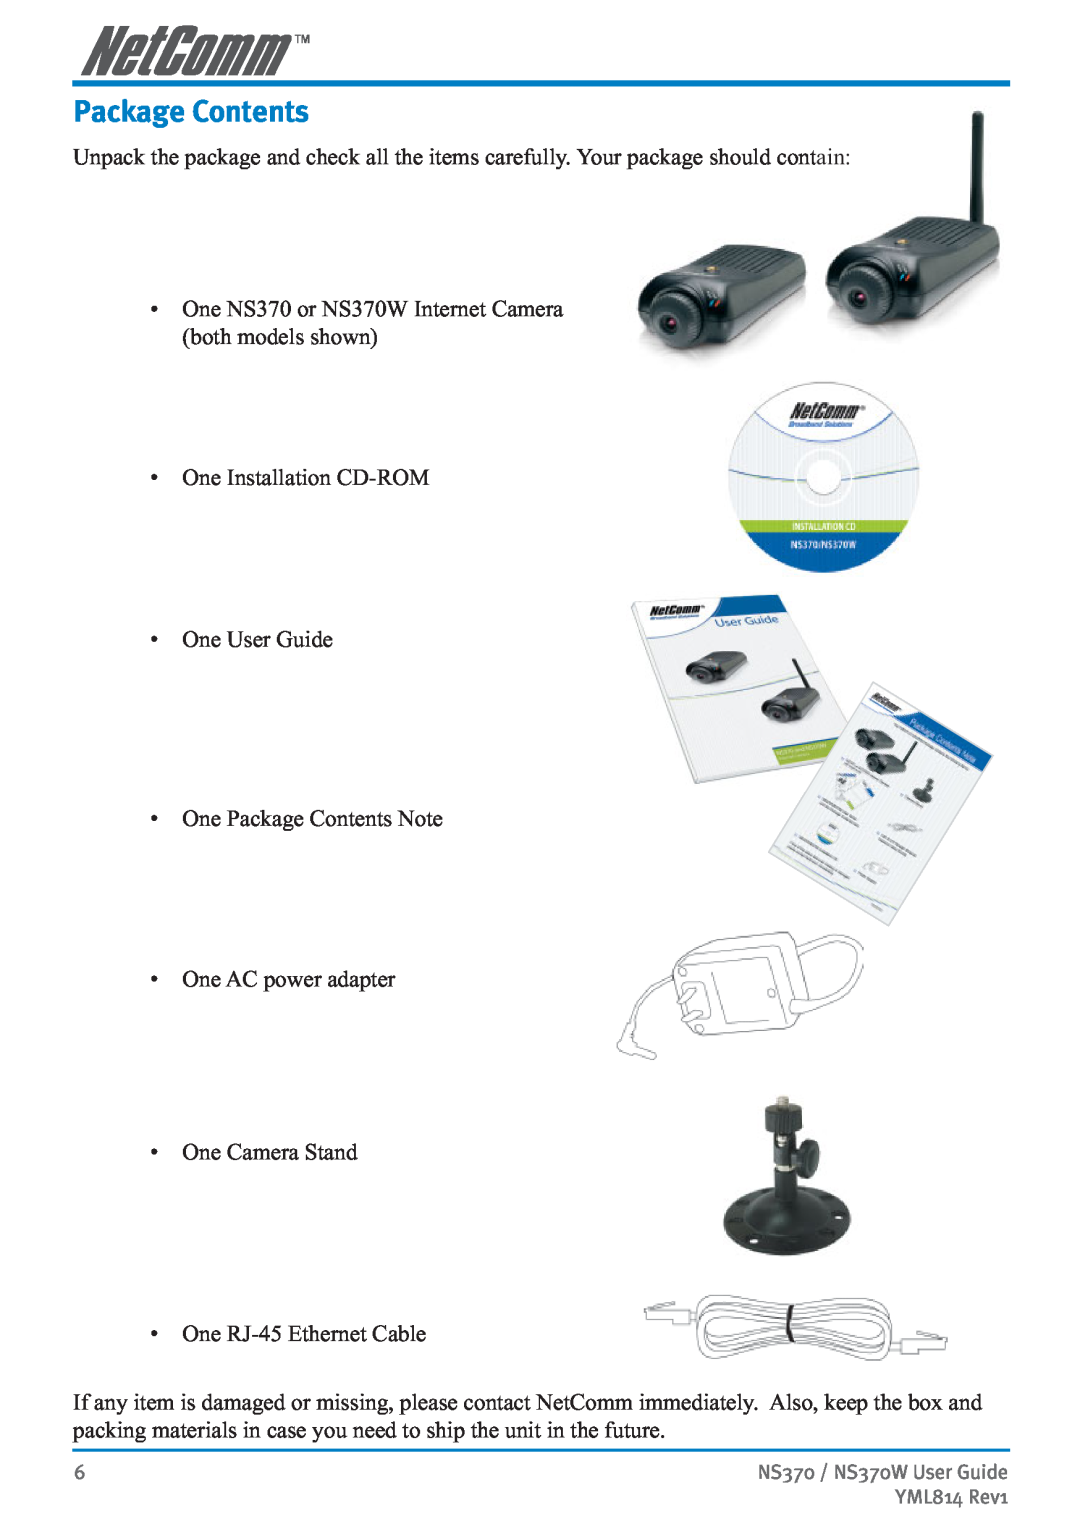 NetComm NS370W manual Package Contents 